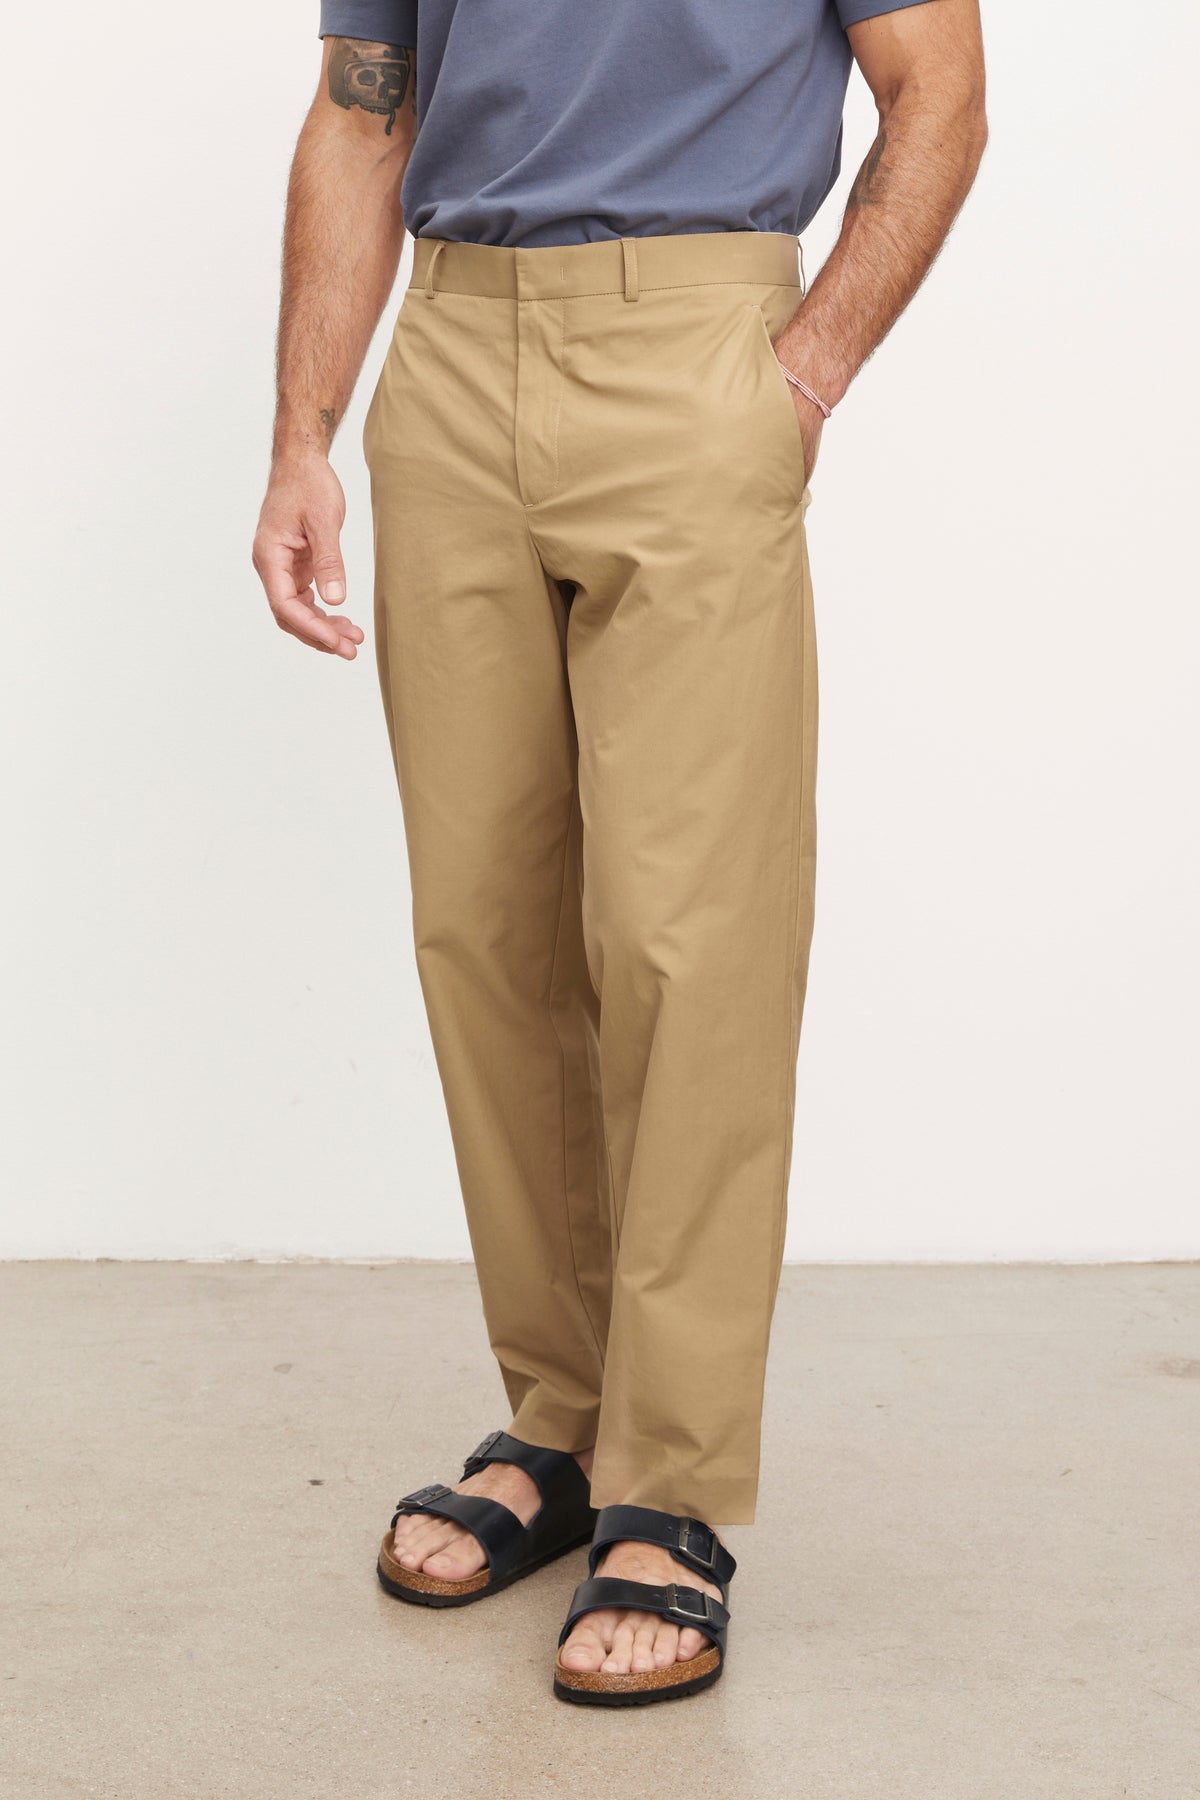 The man is wearing STING POPLIN PANT by Velvet by Graham & Spencer and sandals.-36009027305665